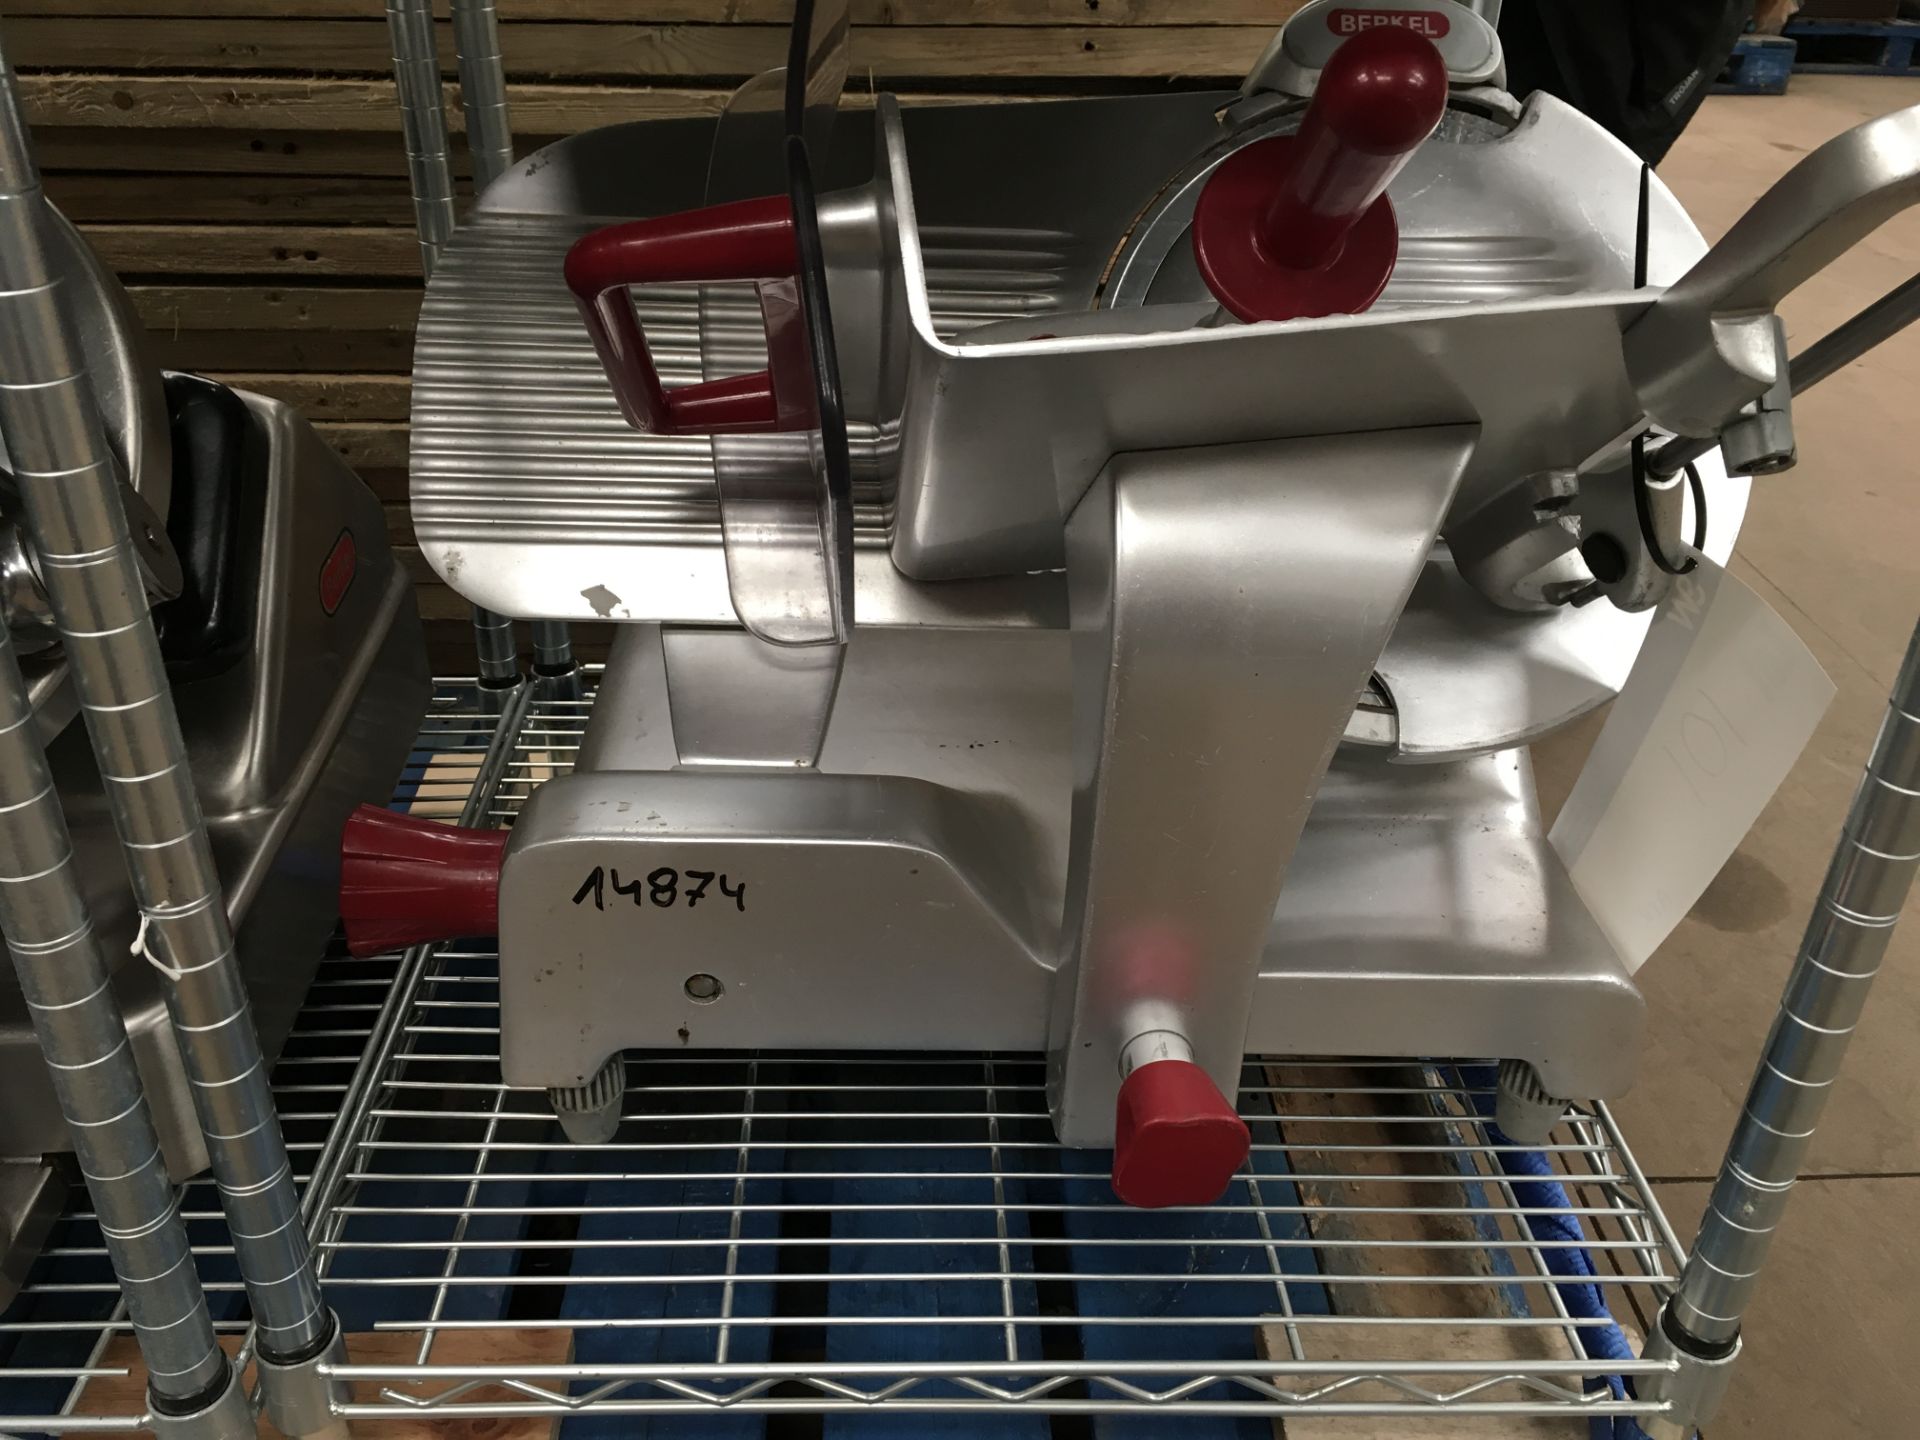 Berkel Type BSFGL040113 Slicer, bench top with sharpener, single phase, approx. 700mm long x 500mm - Image 2 of 2